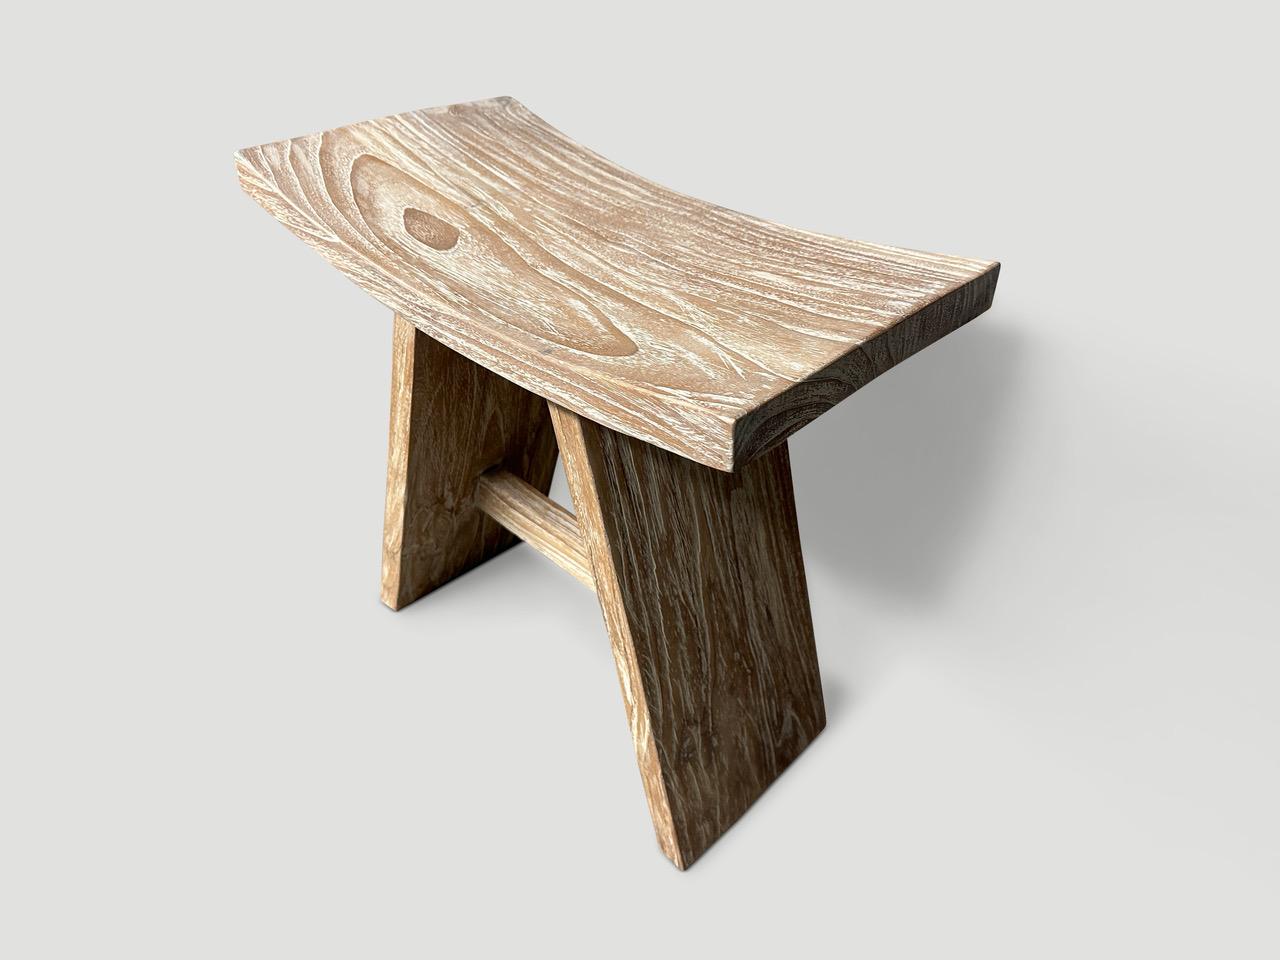 Andrianna Shamaris Minimalist Teak Wood Small Bench In Excellent Condition For Sale In New York, NY